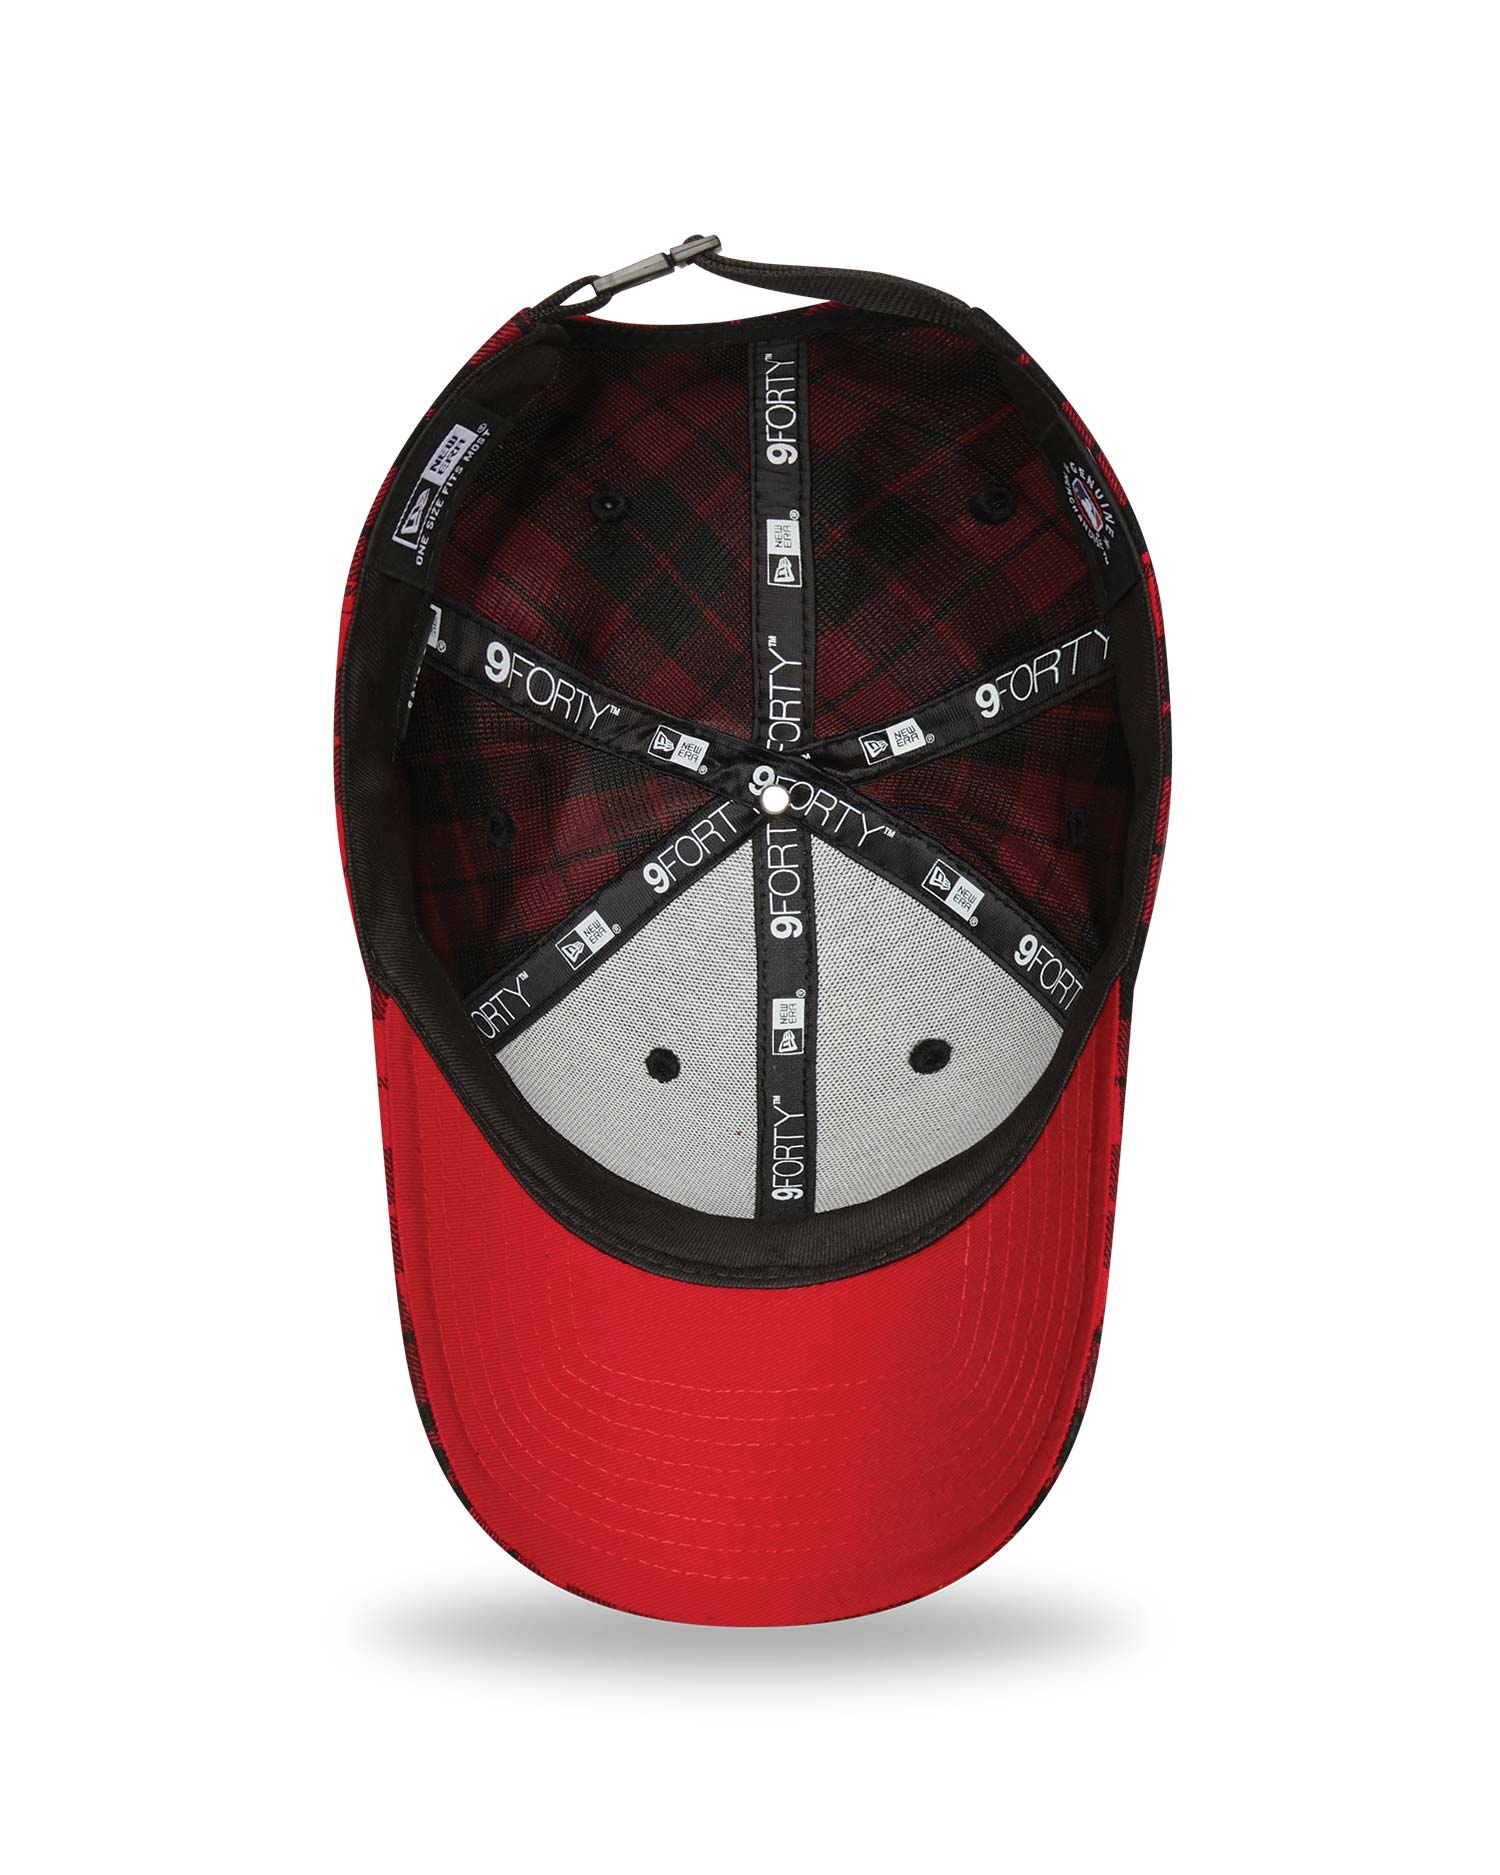 Boston Red Sox Plaid Red 9FORTY Adjustable Cap